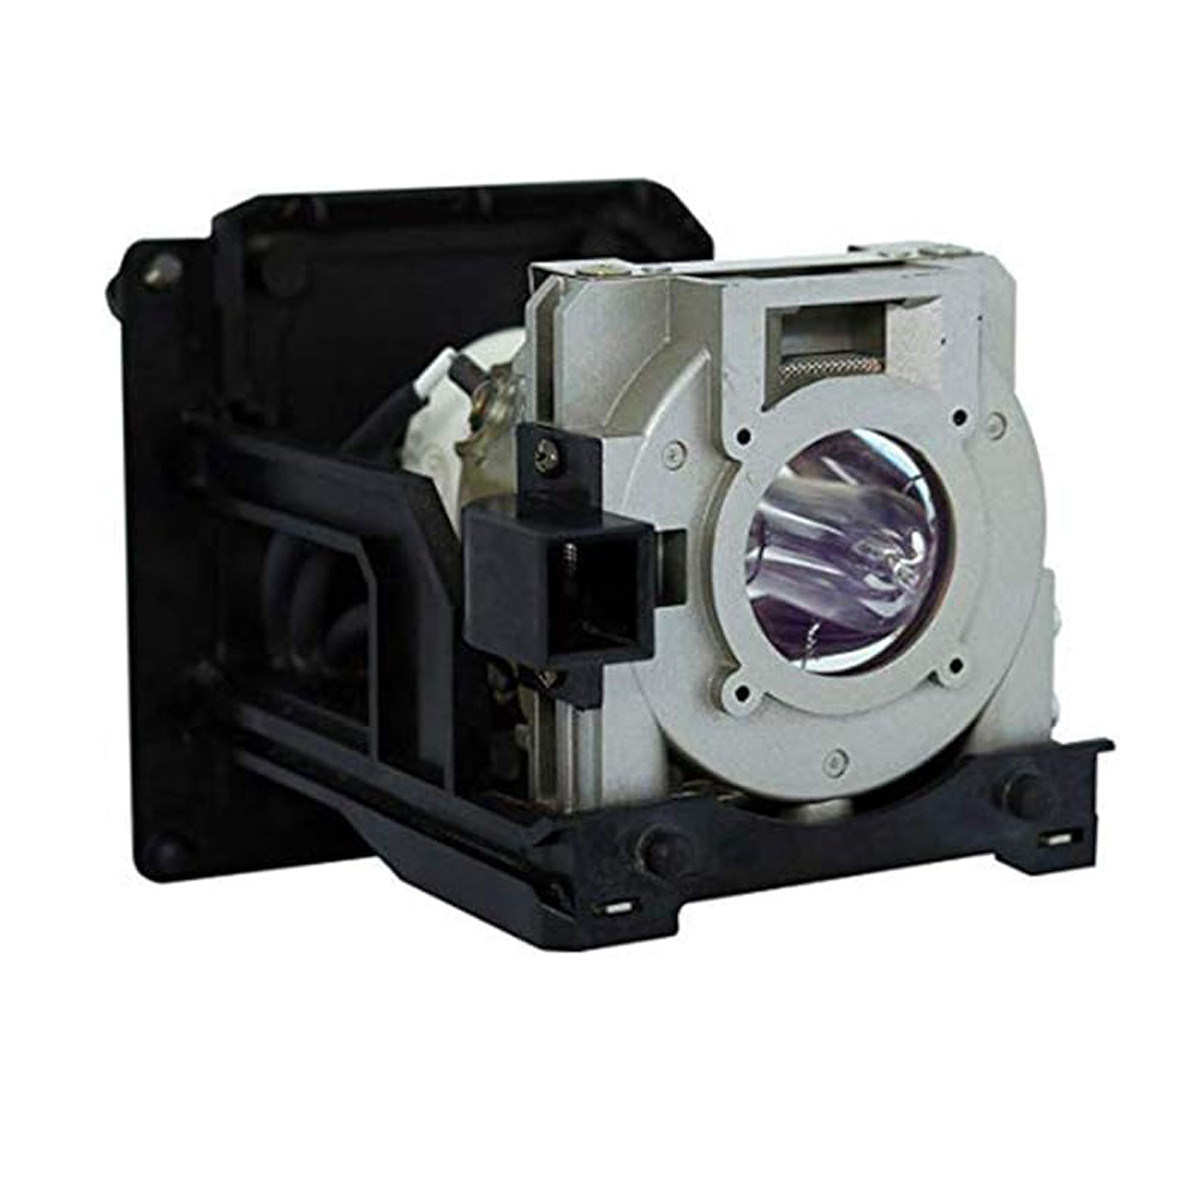 Replacement Projector lamp 456-8760 For Dukane Projector